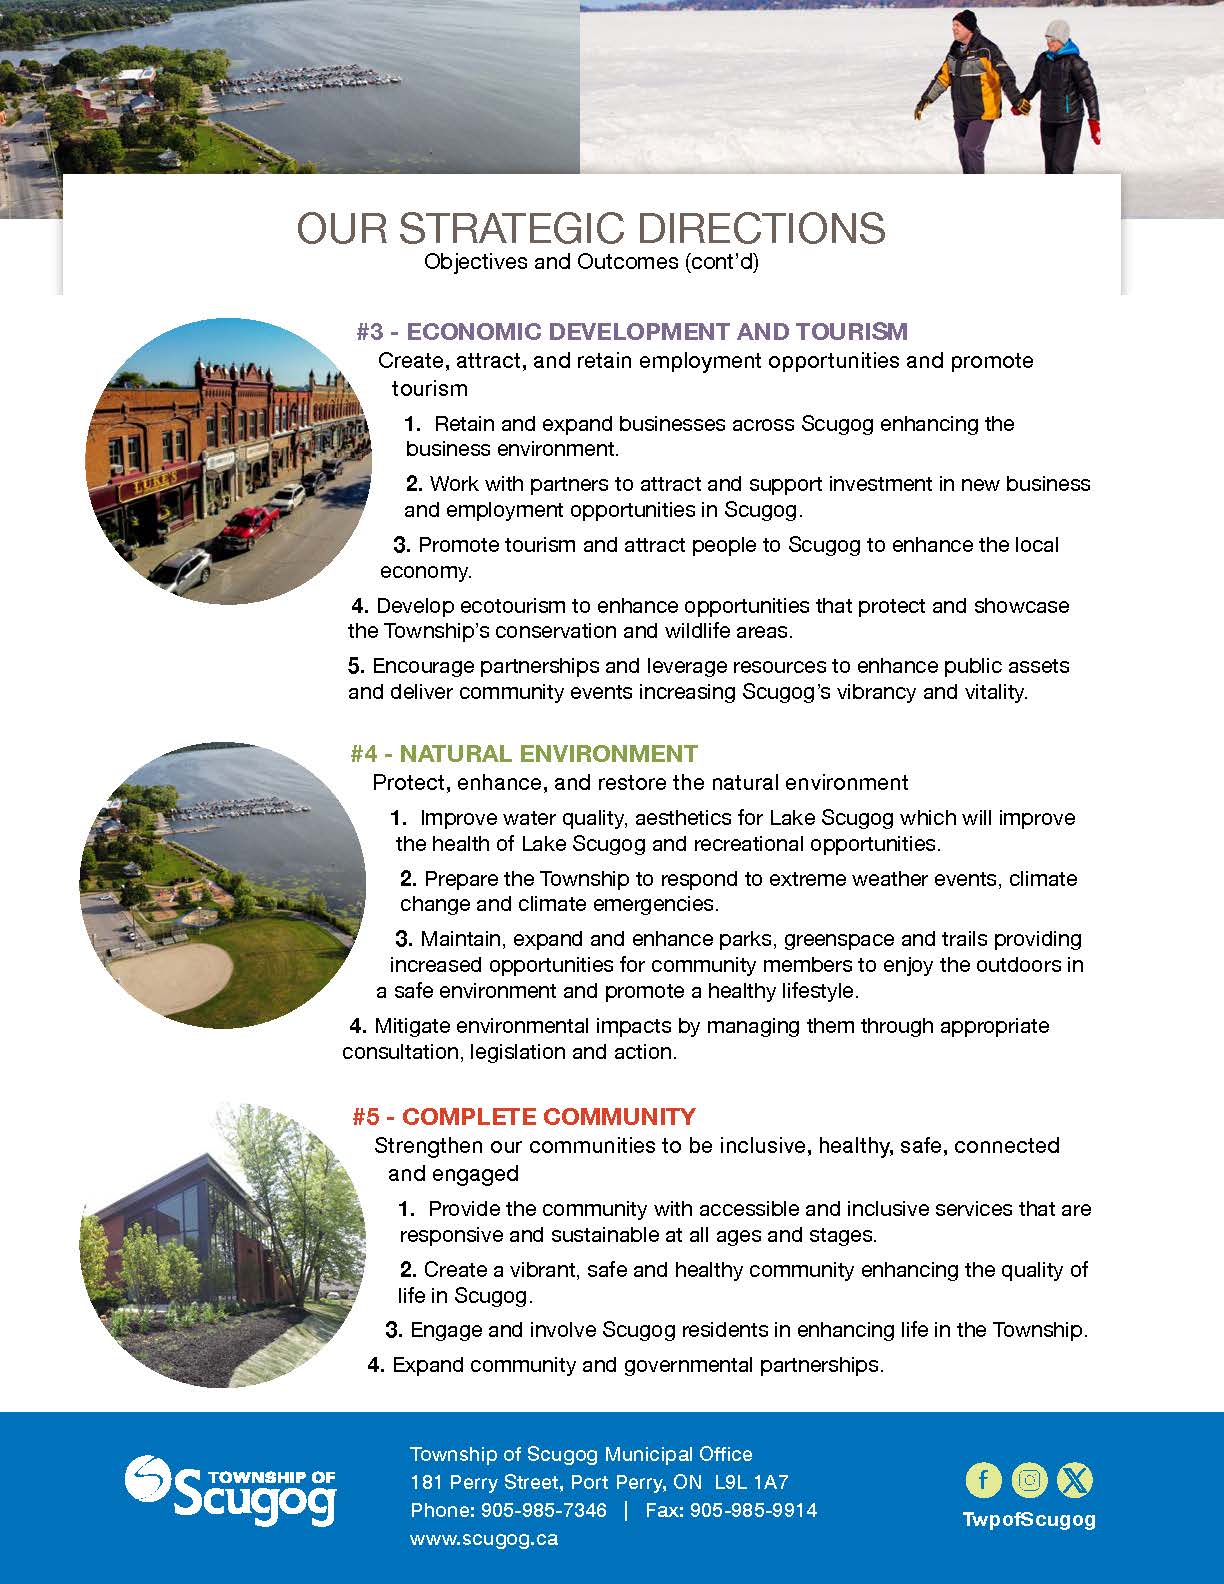 Scugog images with Strategic Directions #3 Economic Development and Tourism, #4 Natural Environment, #5 Complete Community